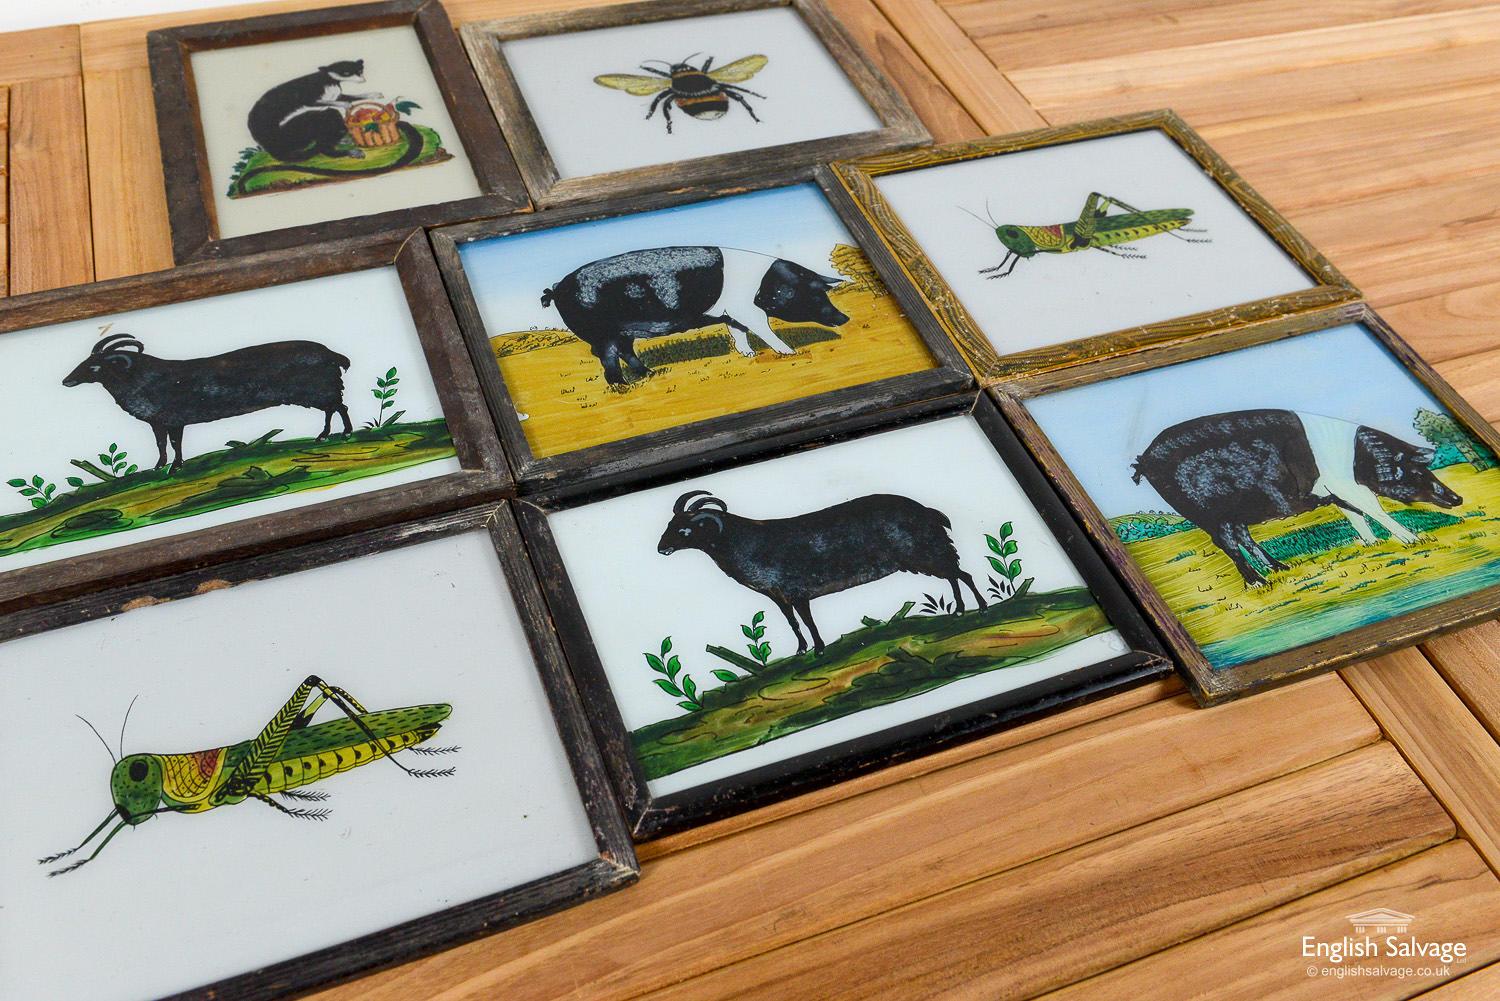 Framed paintings on glass of animals reclaimed from India. Rough size of the landscape orientated paintings below, the portrait painting is 21.5 cm wide x 28.5 cm high. Some scuffing to wooden frames, otherwise they are in good condition.